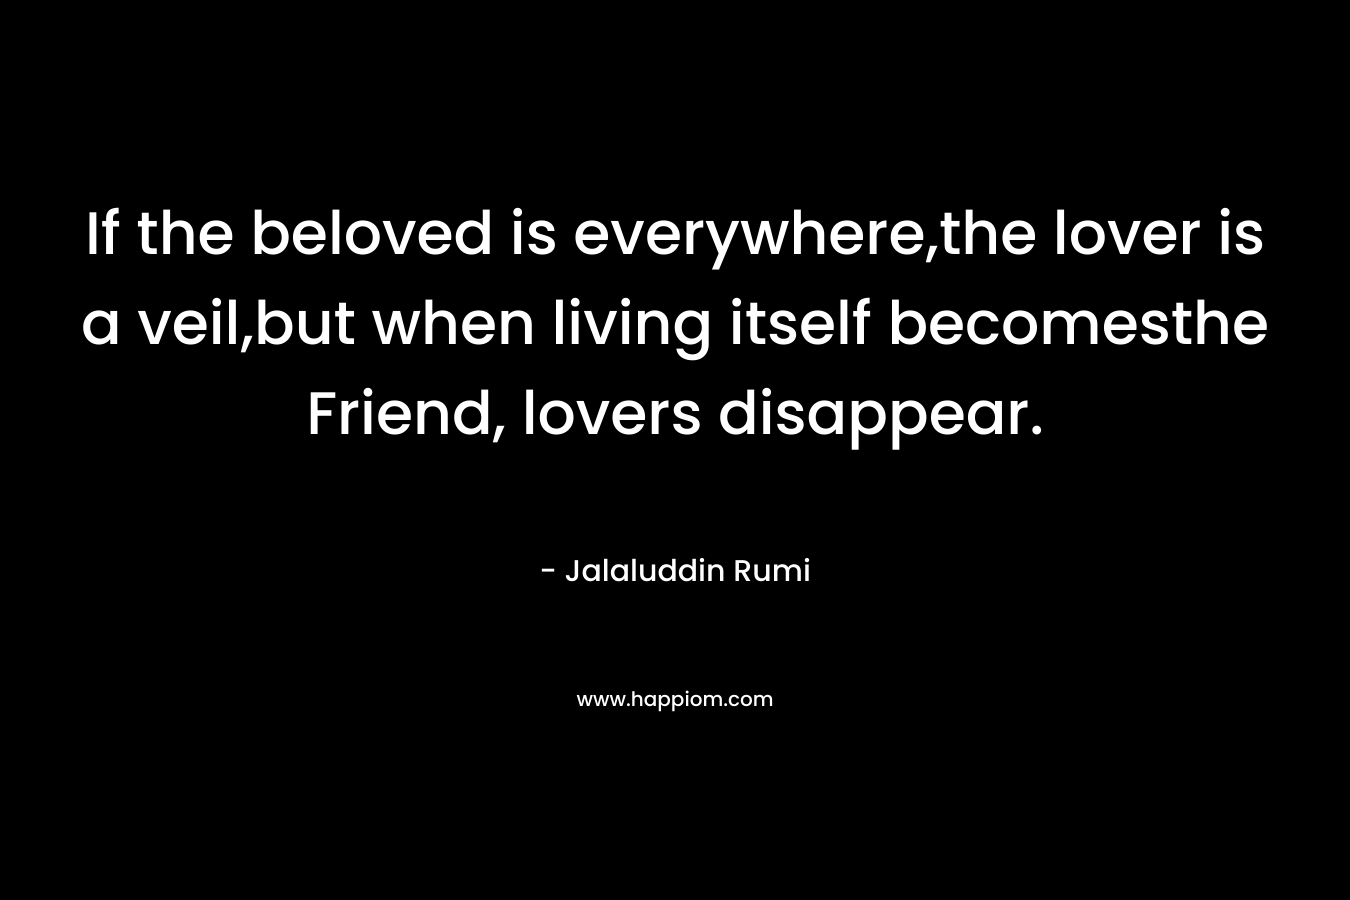 If the beloved is everywhere,the lover is a veil,but when living itself becomesthe Friend, lovers disappear. – Jalaluddin Rumi